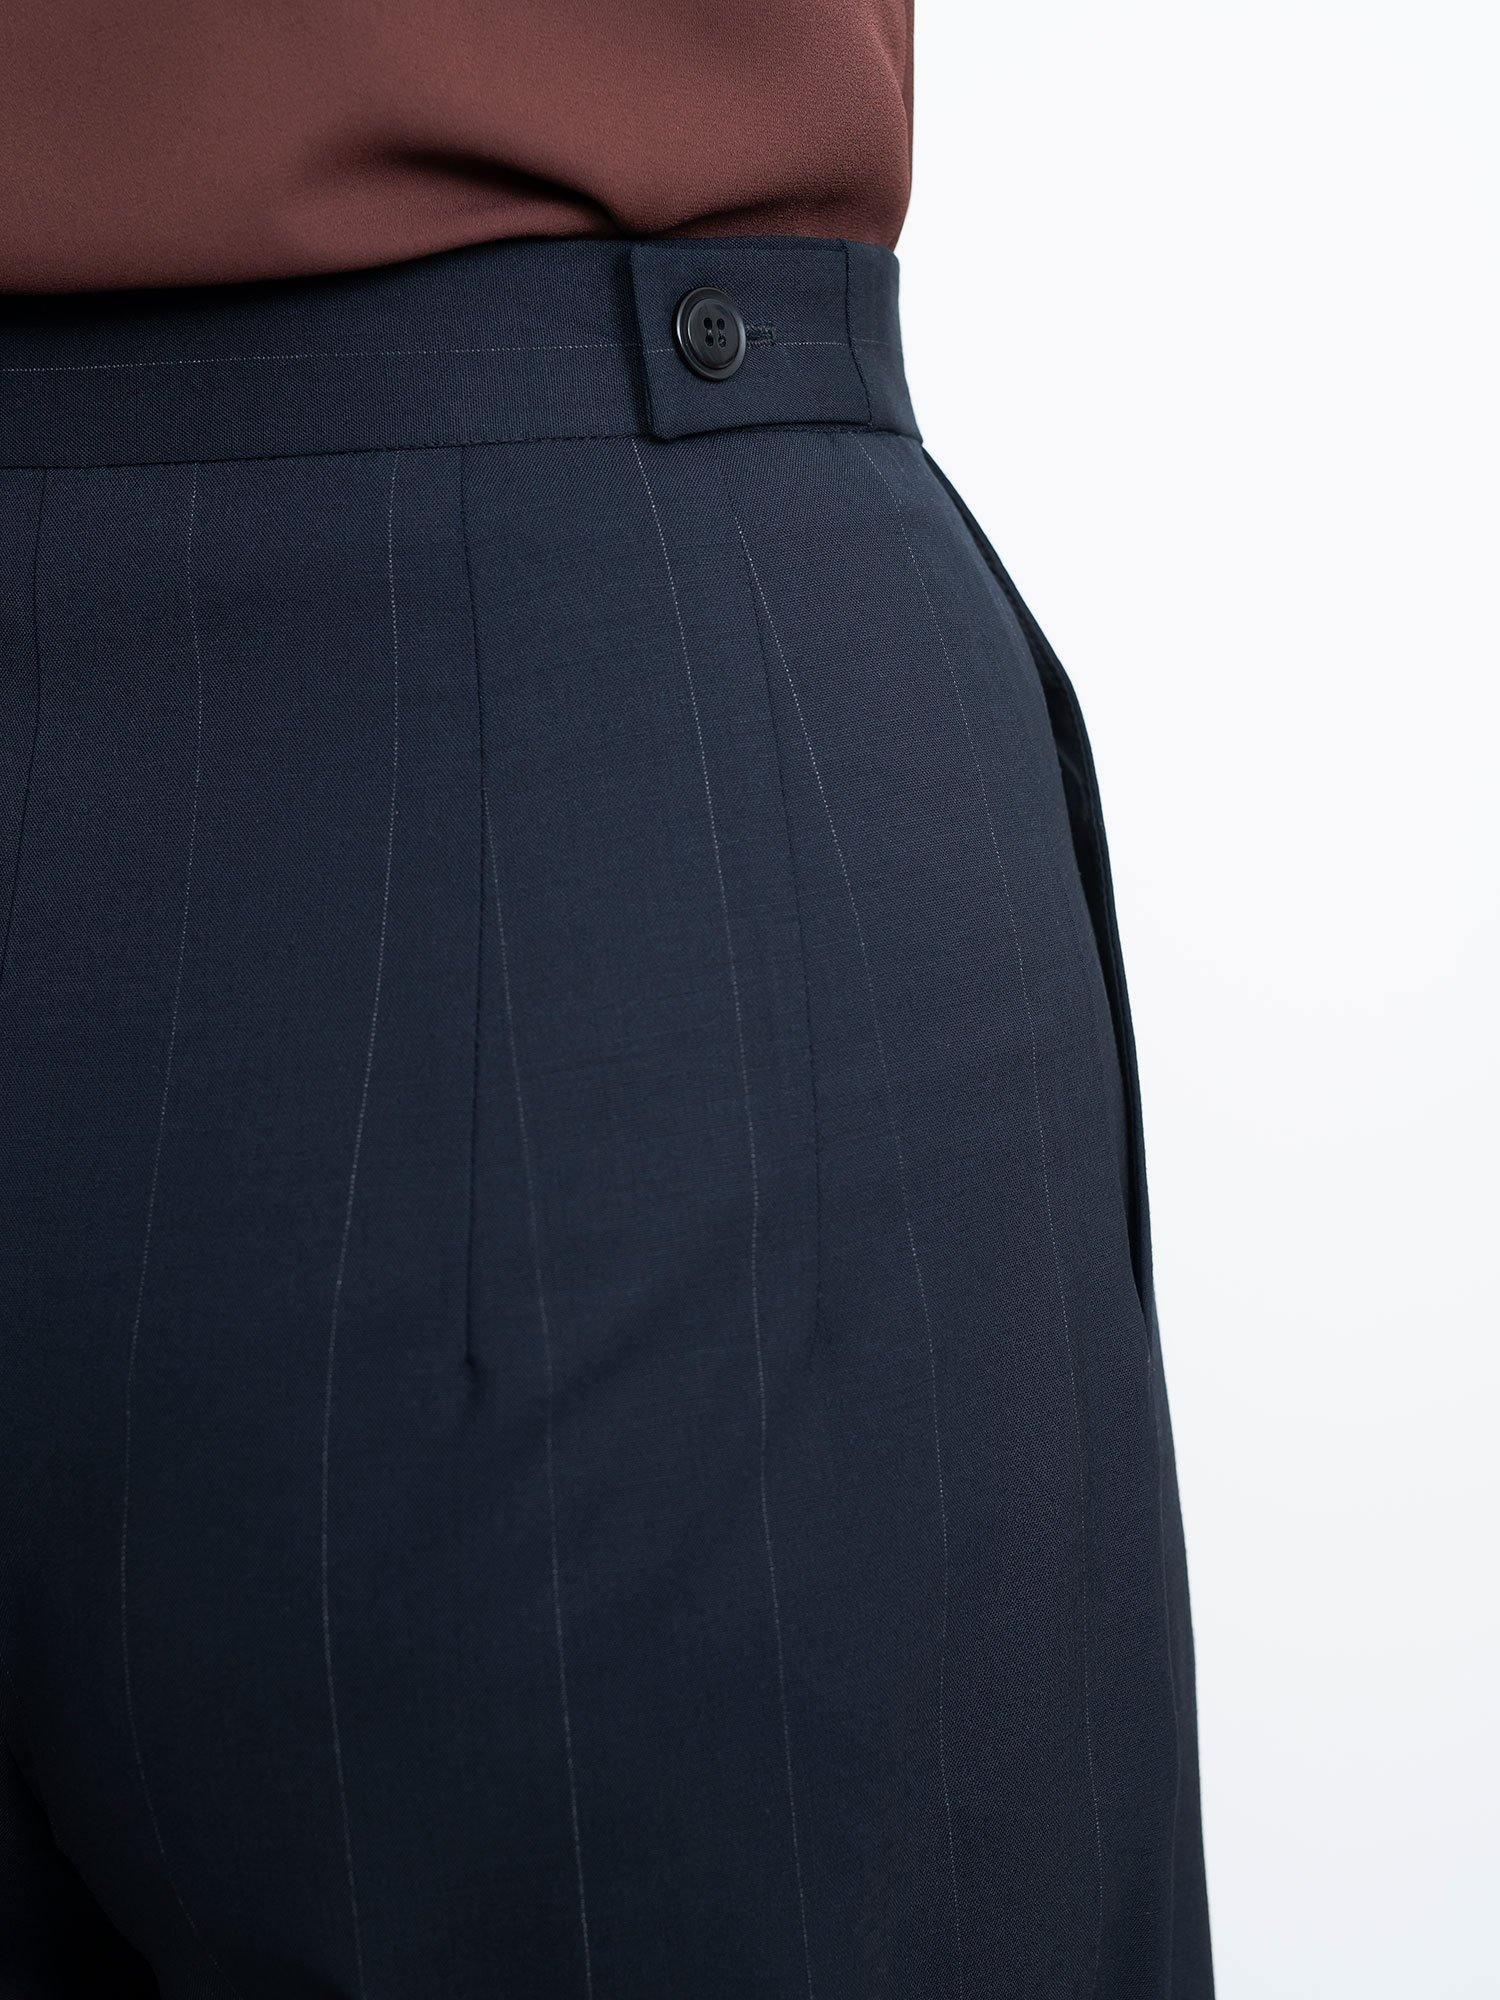 Trouser Waist Height Adjustment for a Lower Front Rise / Wearing Under –  Twig + Tale